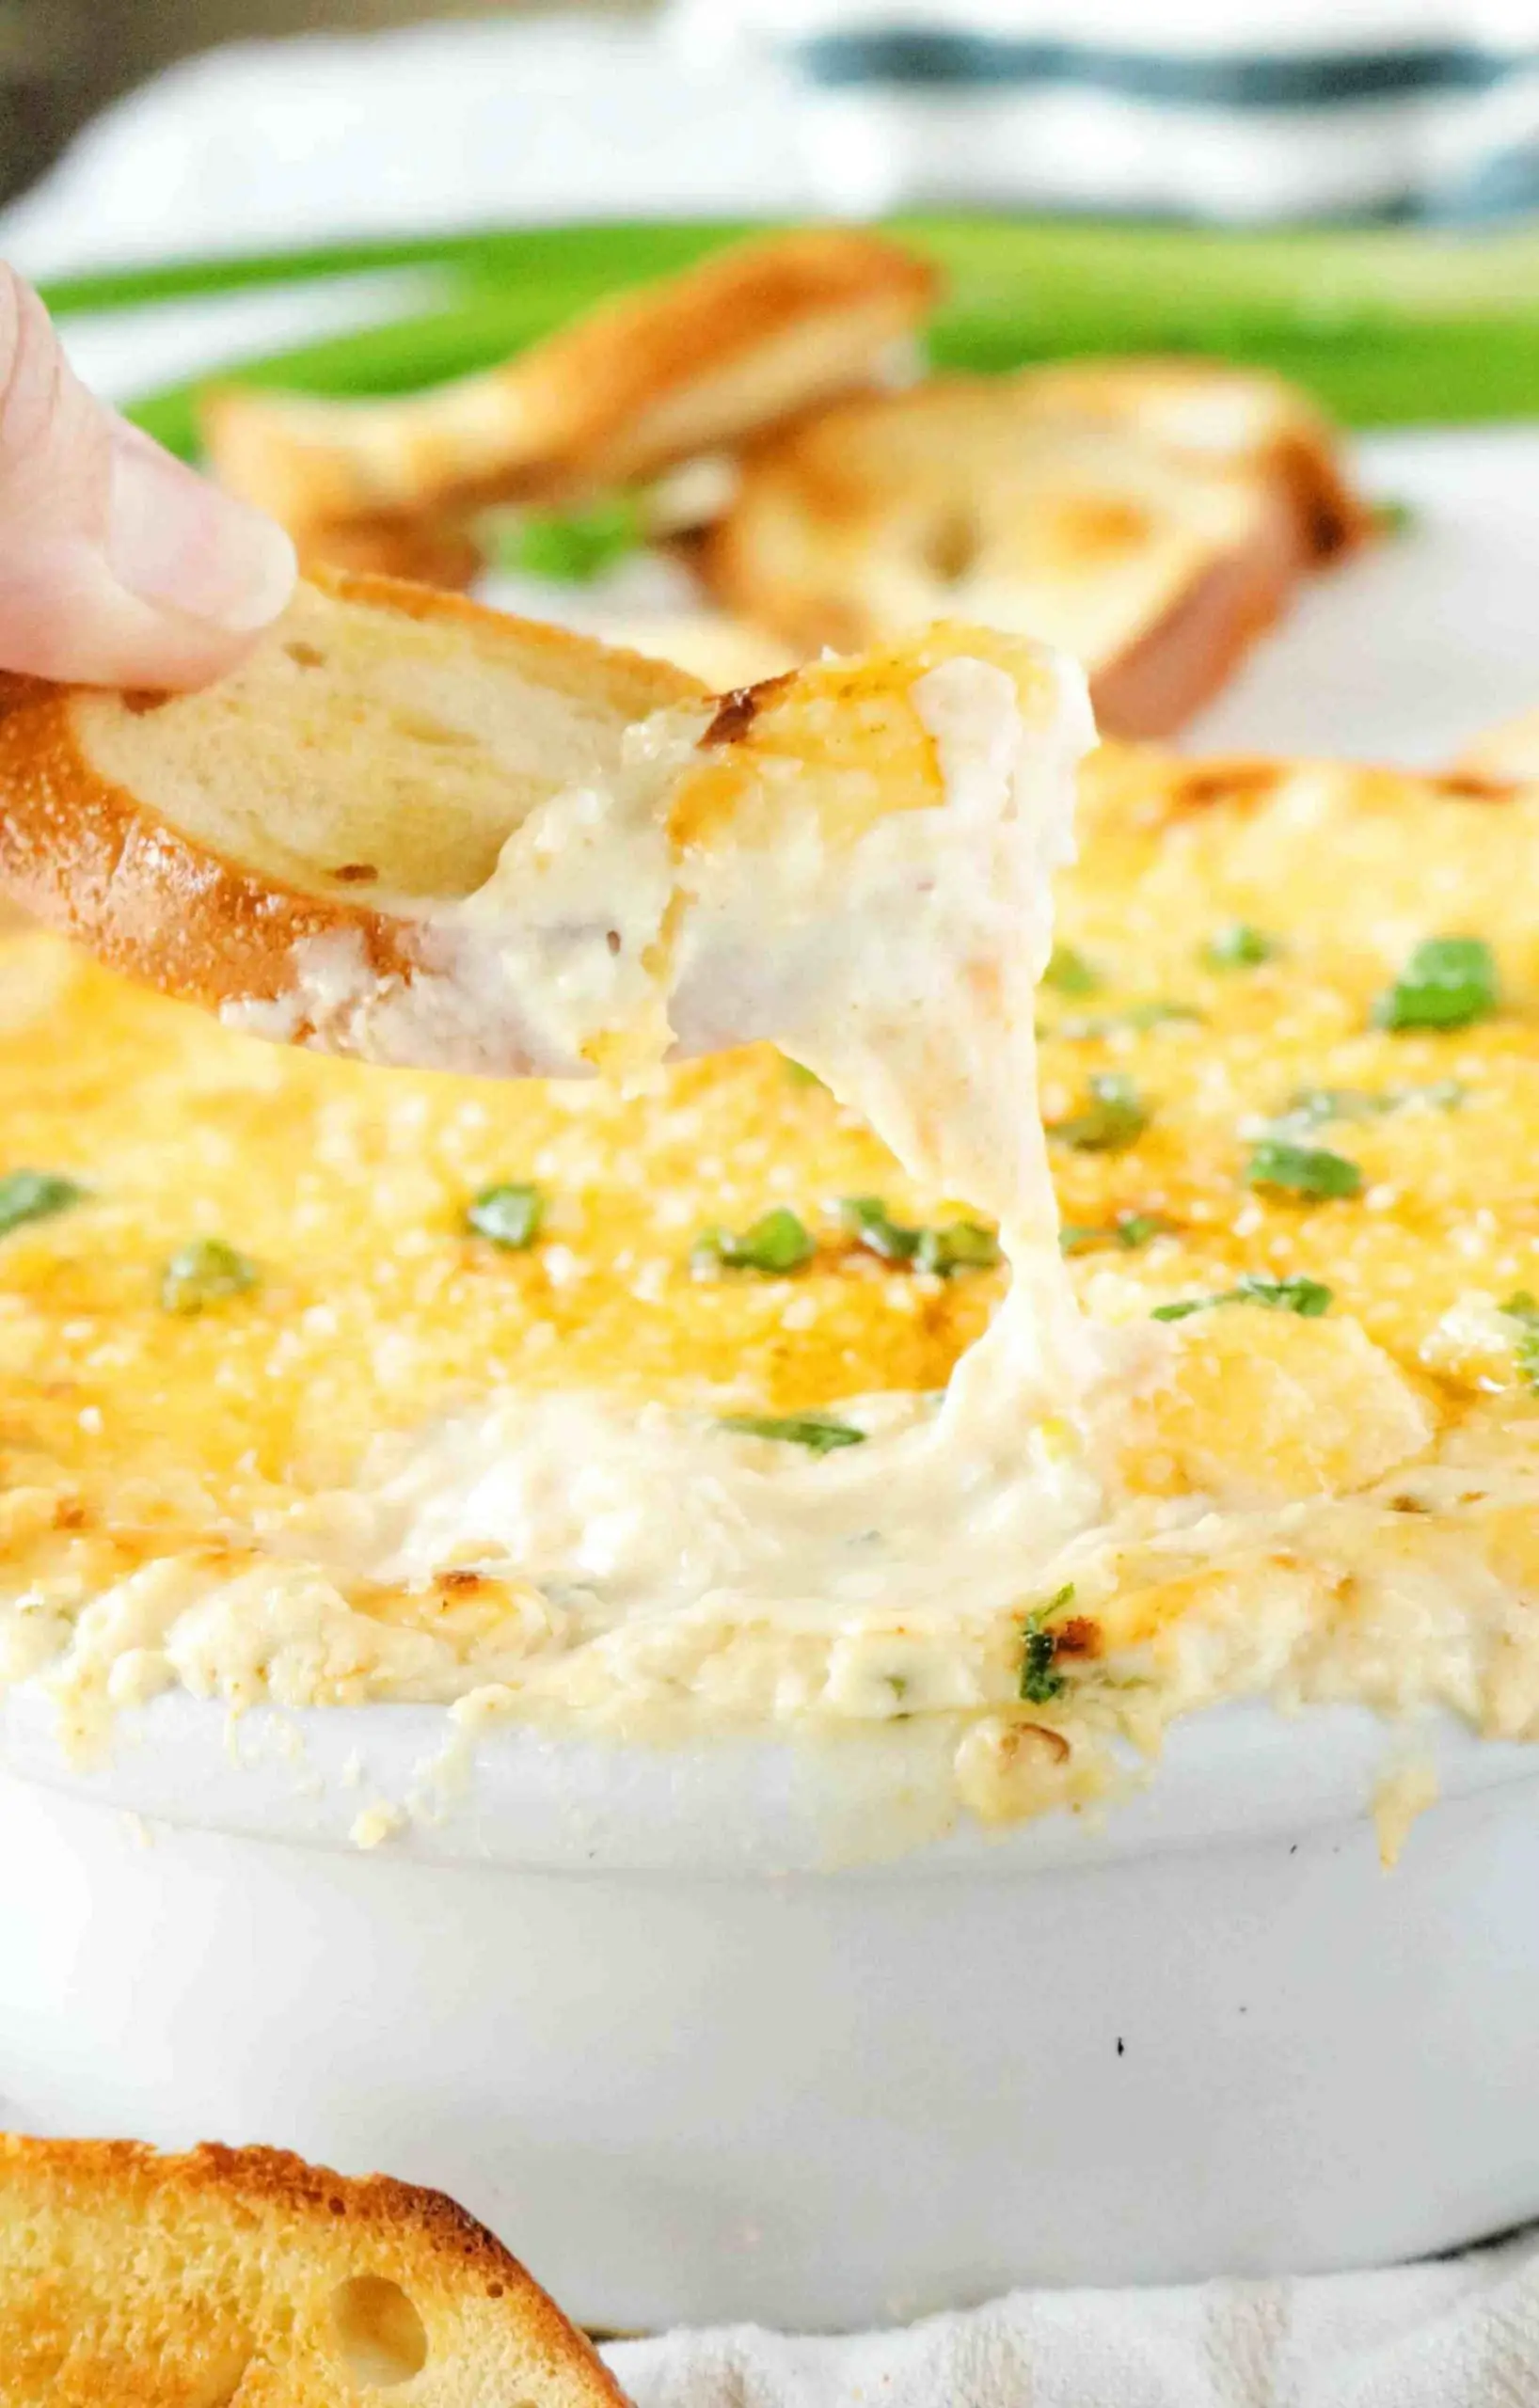 Hot Crab Dip with Cream Cheese